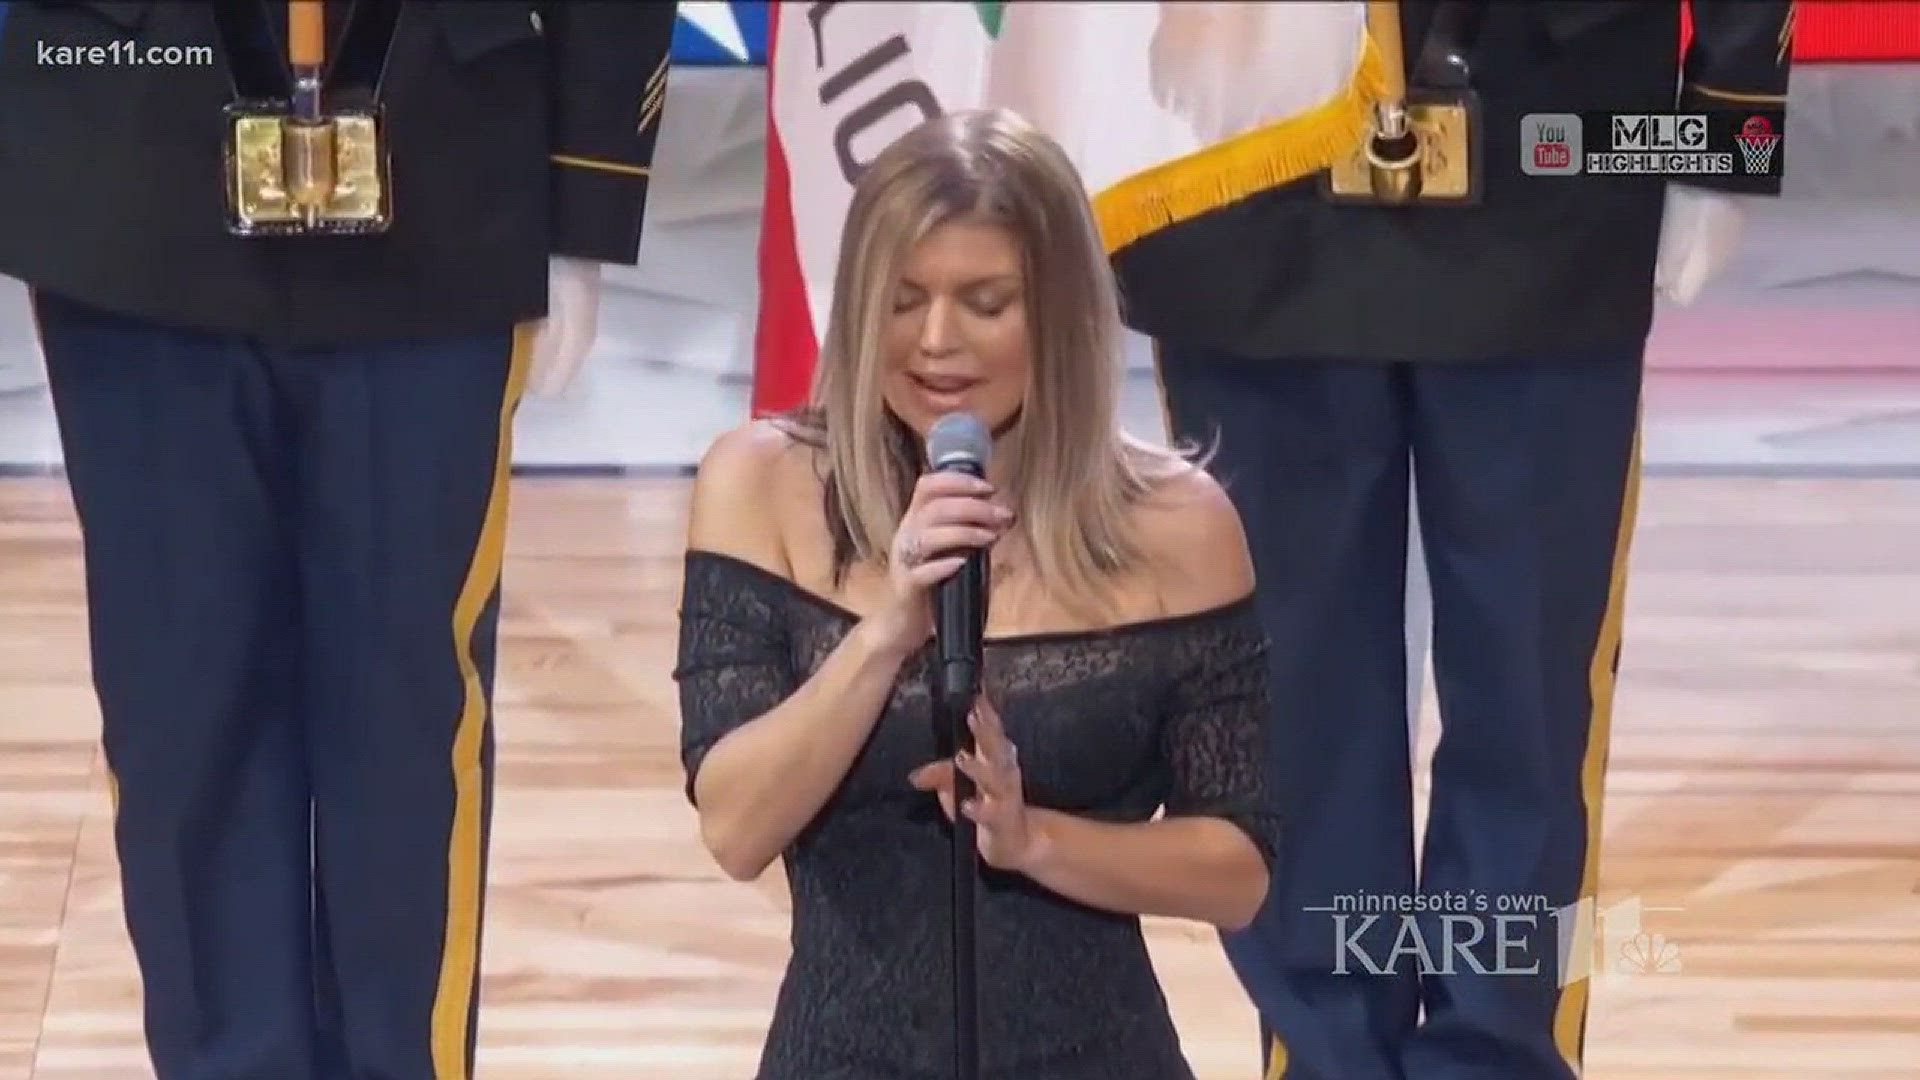 The internet is roasting Fergie after she sang the national anthem Sunday night ahead of the NBA All-Star Game. http://kare11.tv/2Gp9MWc